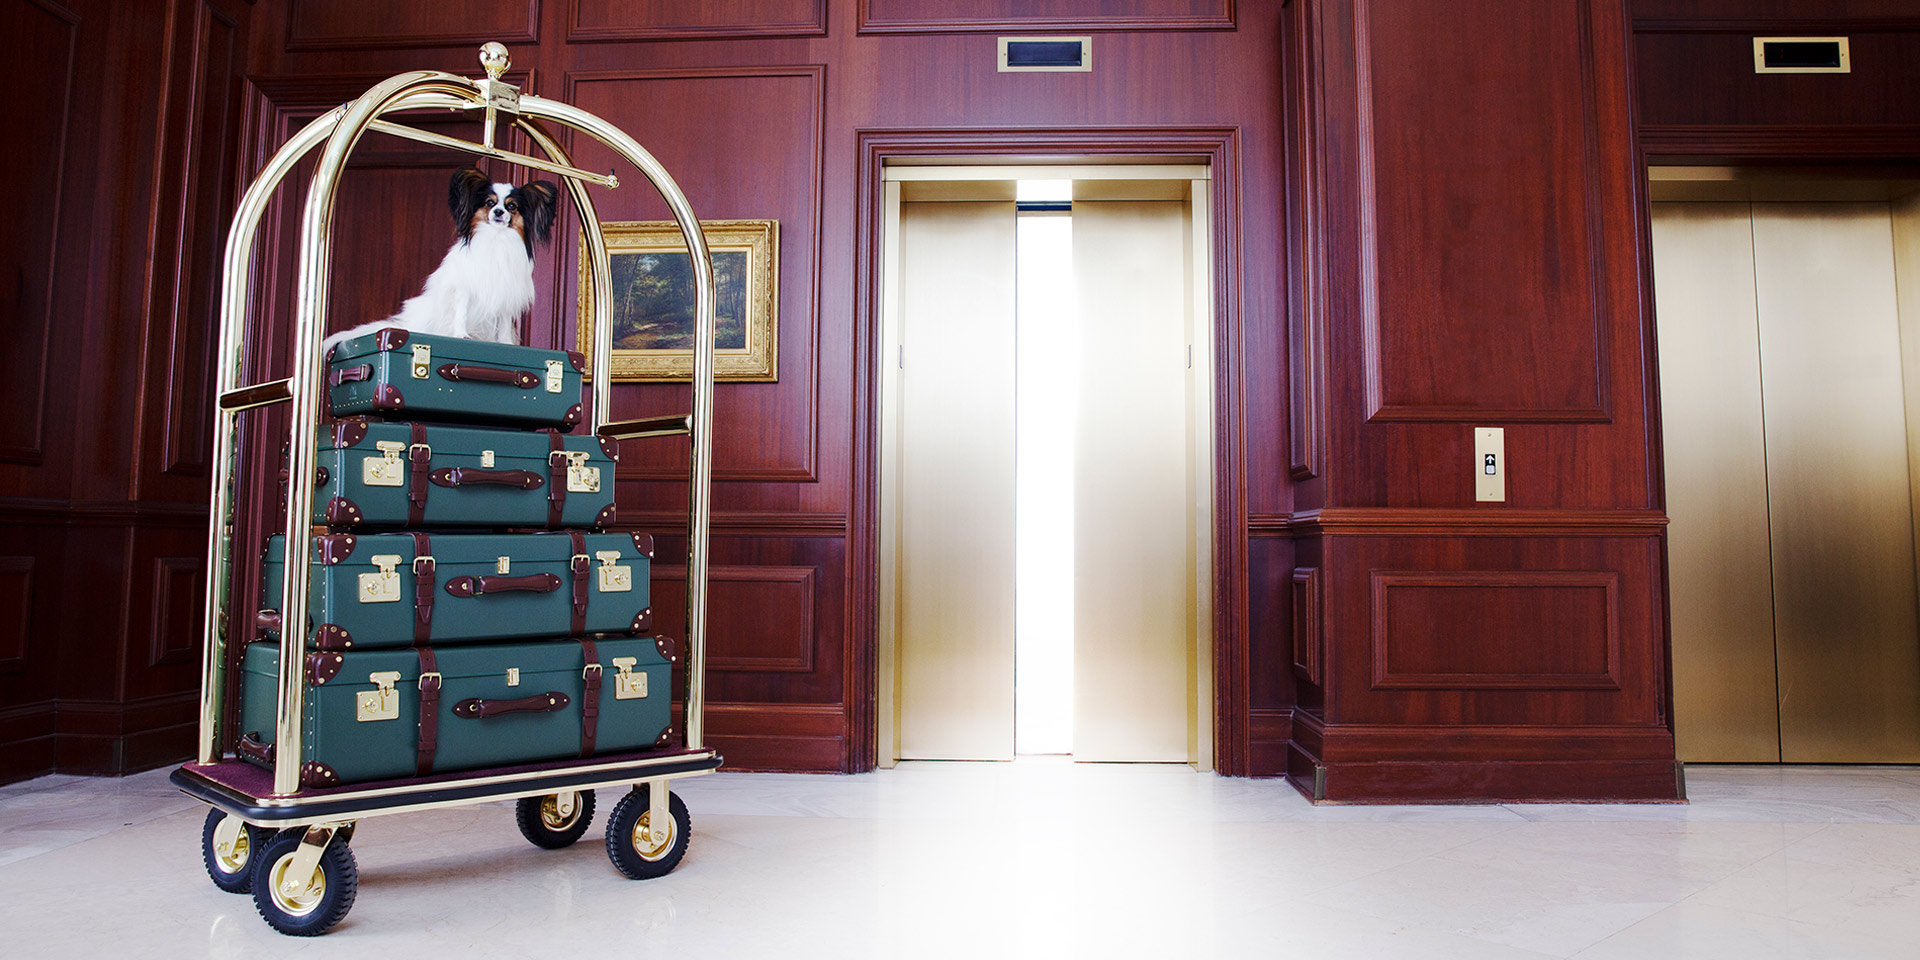 entry of nemacolin with bellhop cart